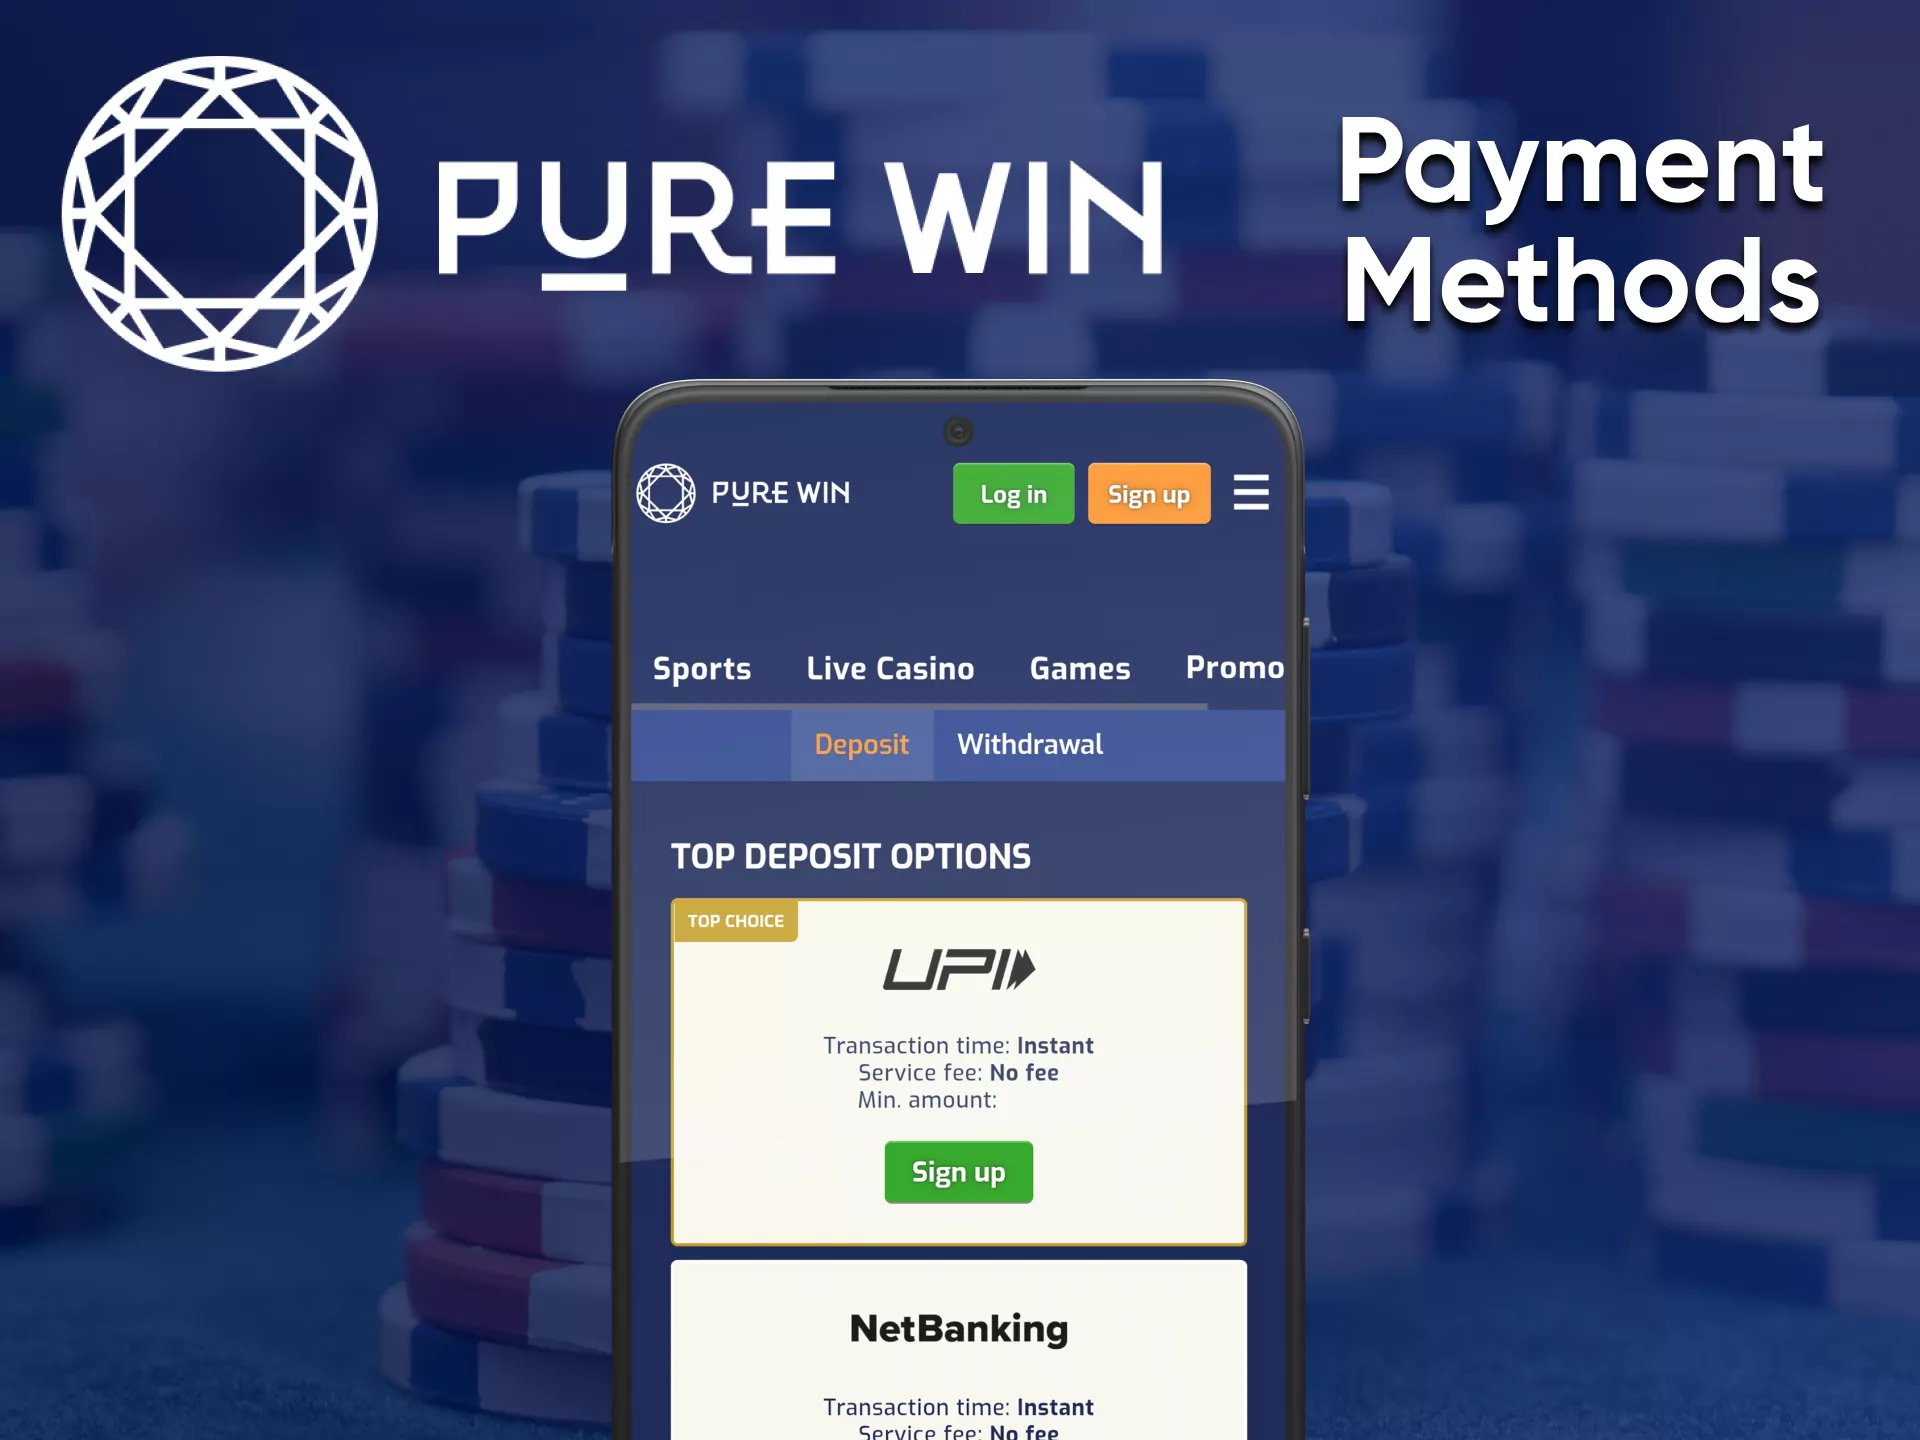 In the Pure Win app, you can make deposits with your usual payment method.